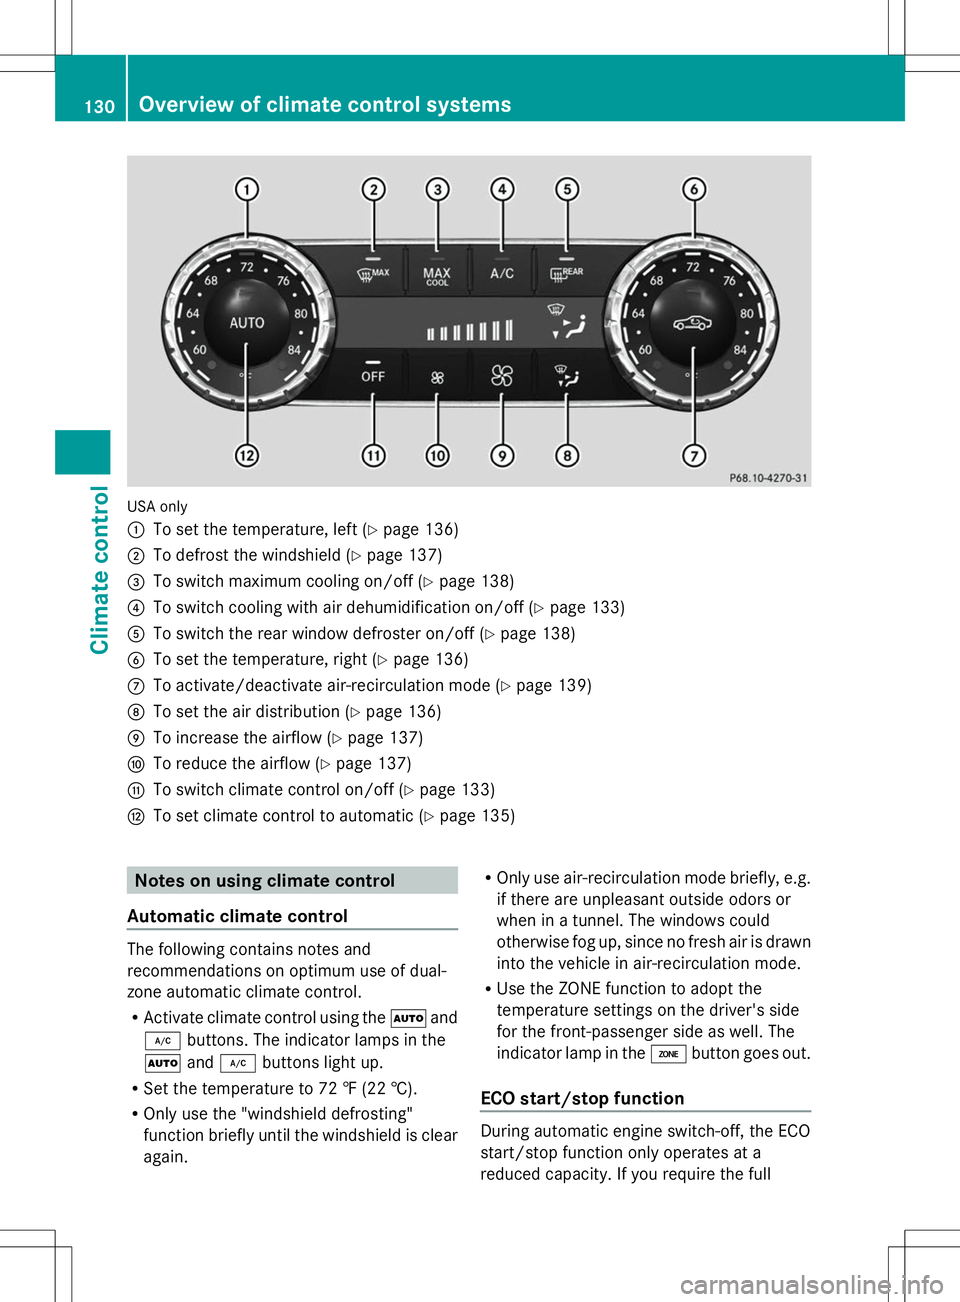 MERCEDES-BENZ GLK-CLASS SUV 2014  Owners Manual USA only
:
To set the temperature, left (Y page 136)
; To defrost the windshield (Y page 137)
= To switch maximum cooling on/off (Y page 138)
? To switch cooling with air dehumidification on/off (Y pa